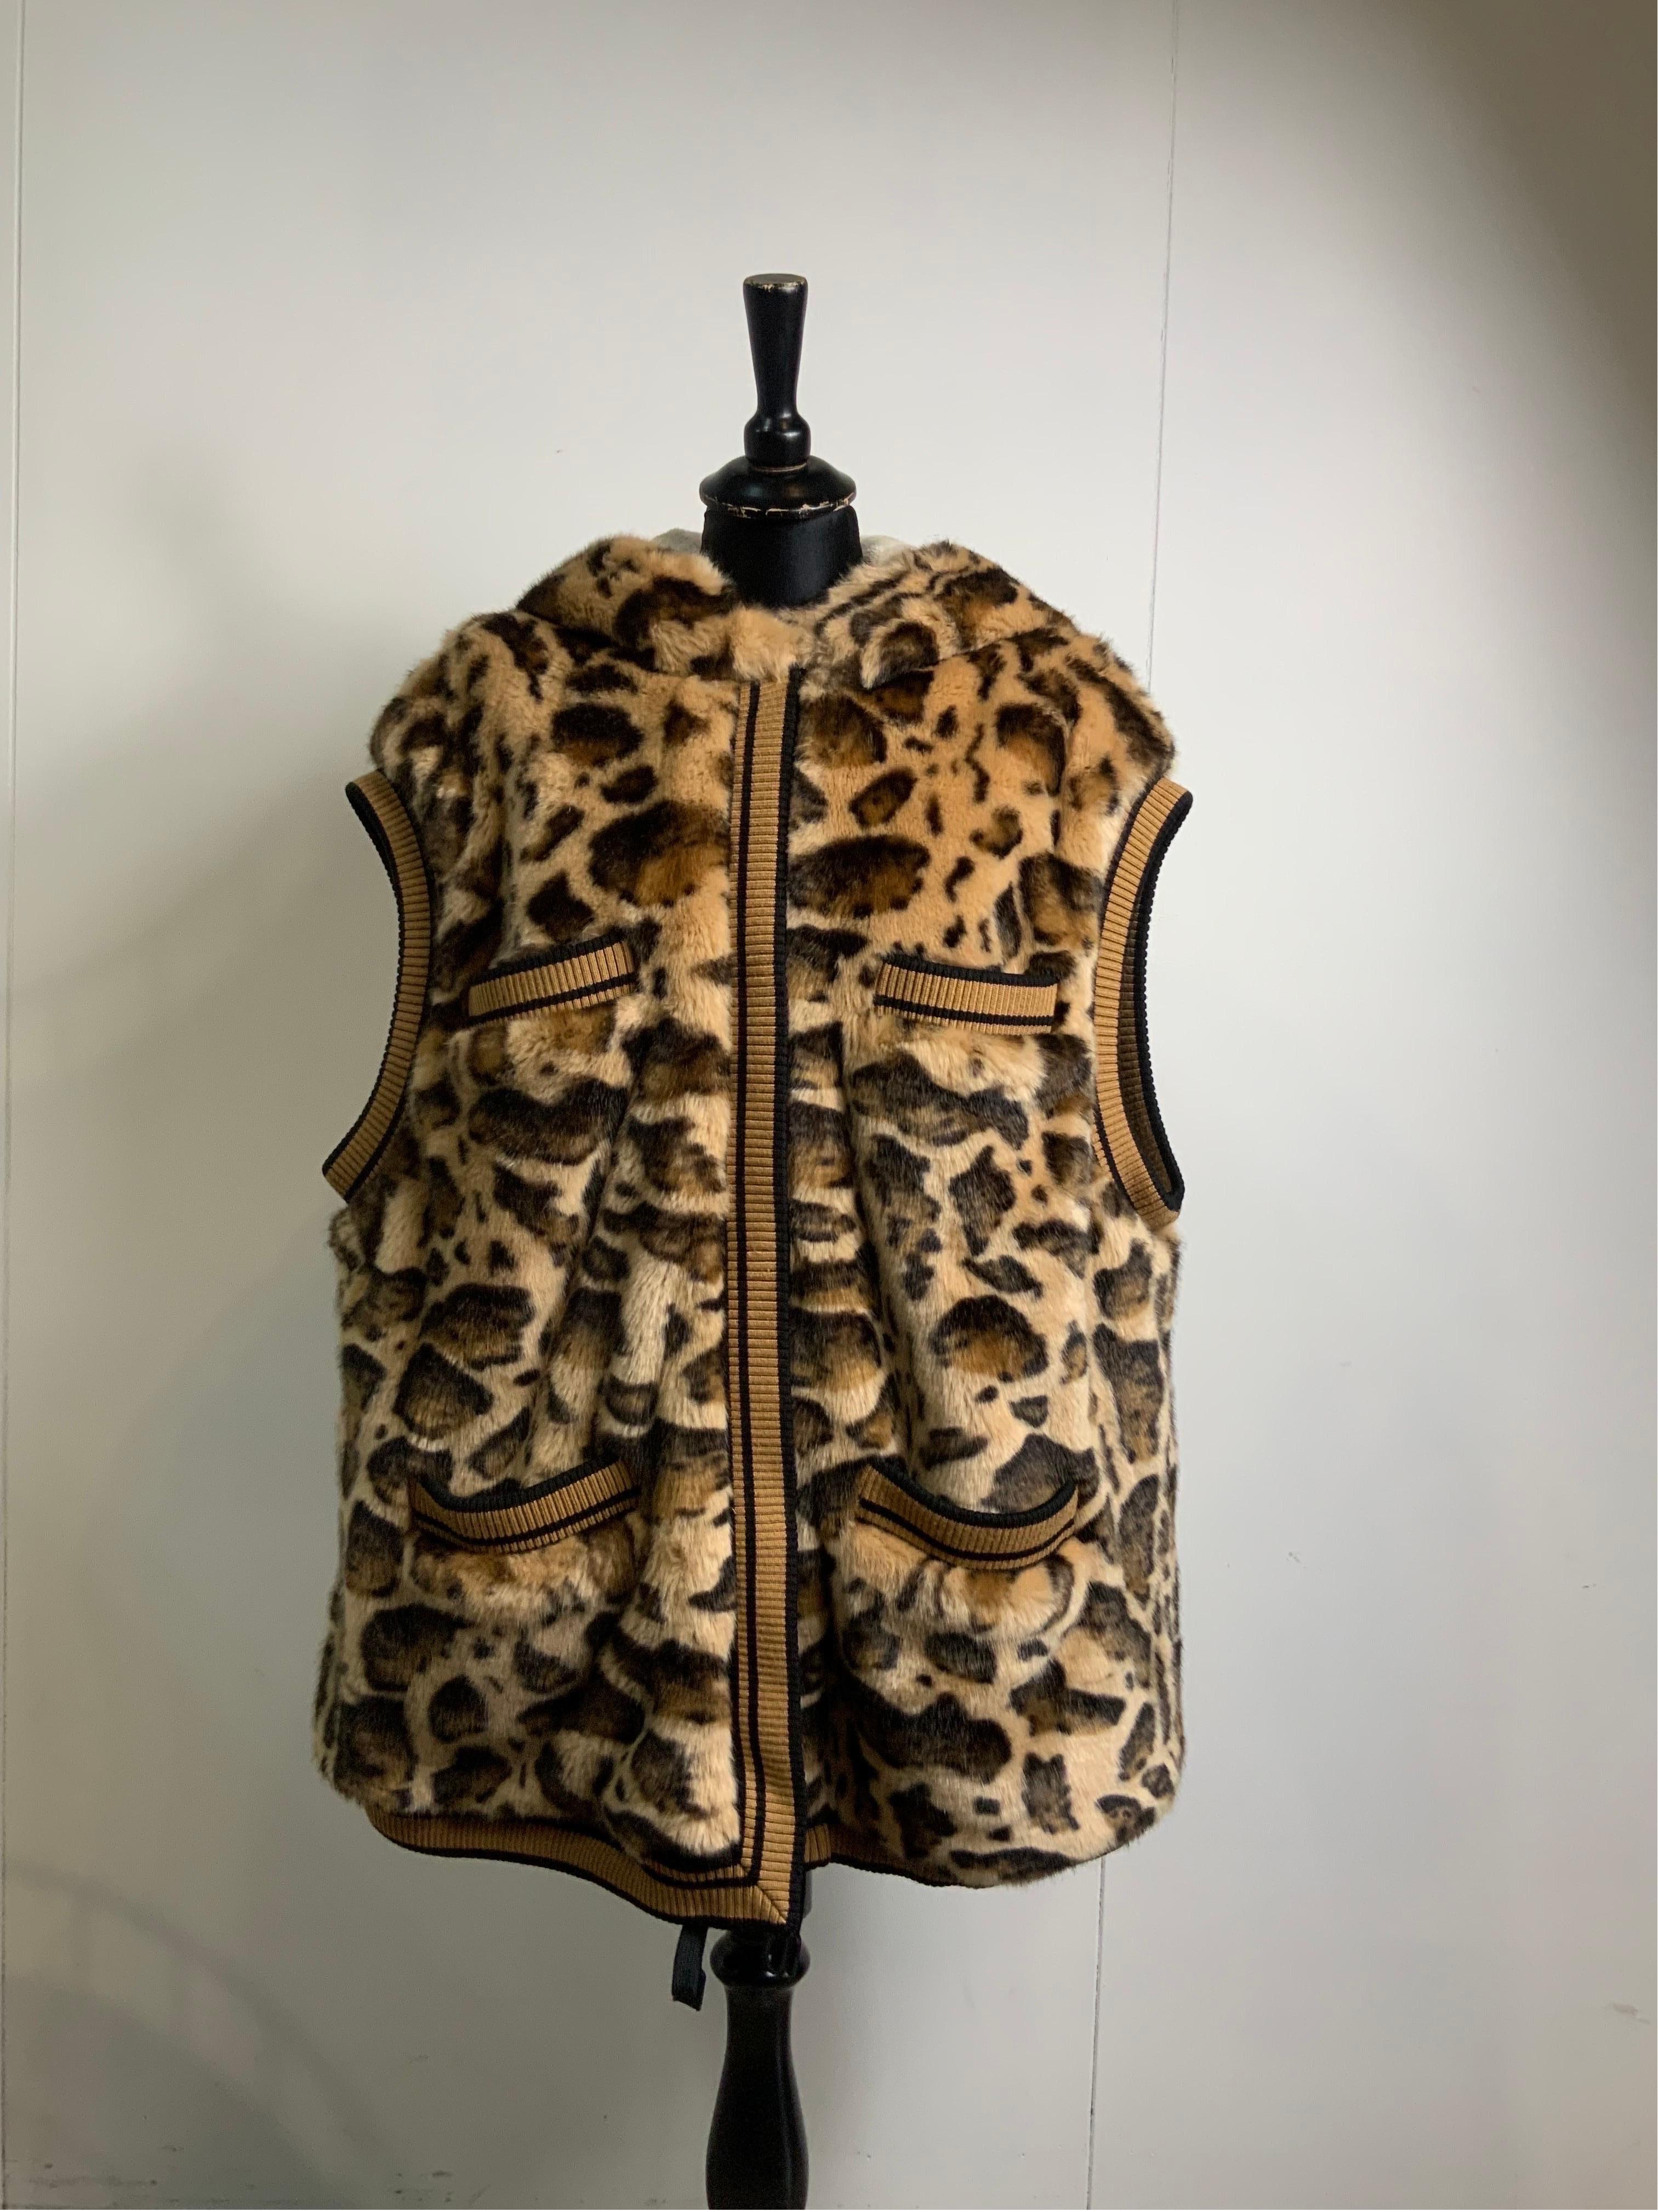 Dolce and Gabbana leopard Jacket
Fall 2017 Ready to wear. Look #2
Composition label missing but it is synthetic fur.
Size 38 Italy but fits oversize.
Shoulders 50 cm
Bust 60 cm
Length 80 cm
Beautiful piece, excellent general condition, like new.